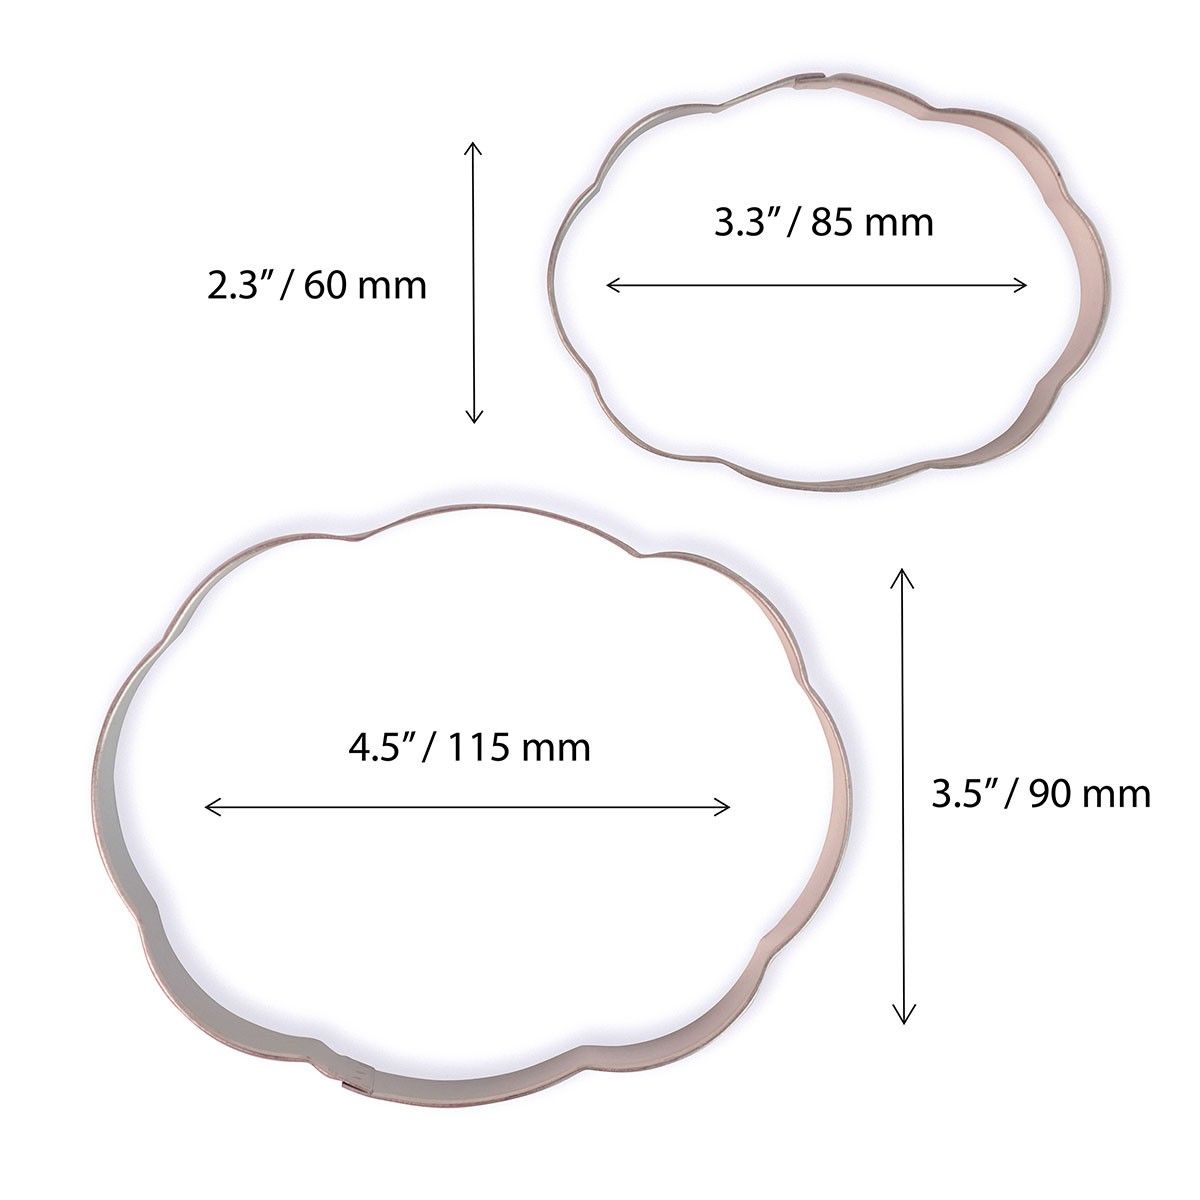 Rounded Plaque Cookie Cutter - Set of 2